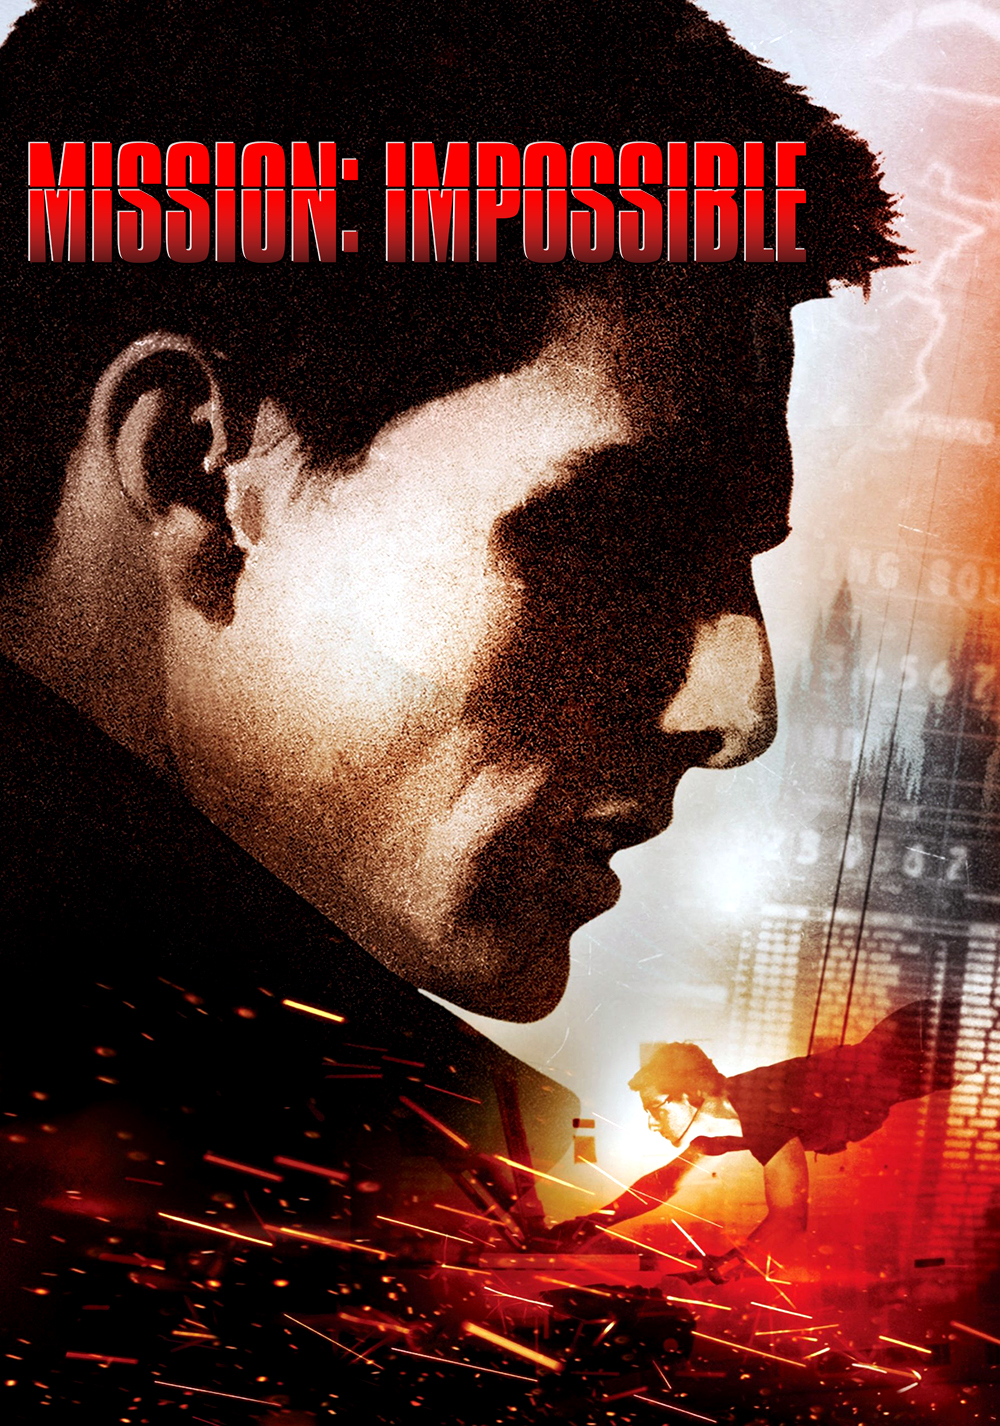 Mission: Impossible Art